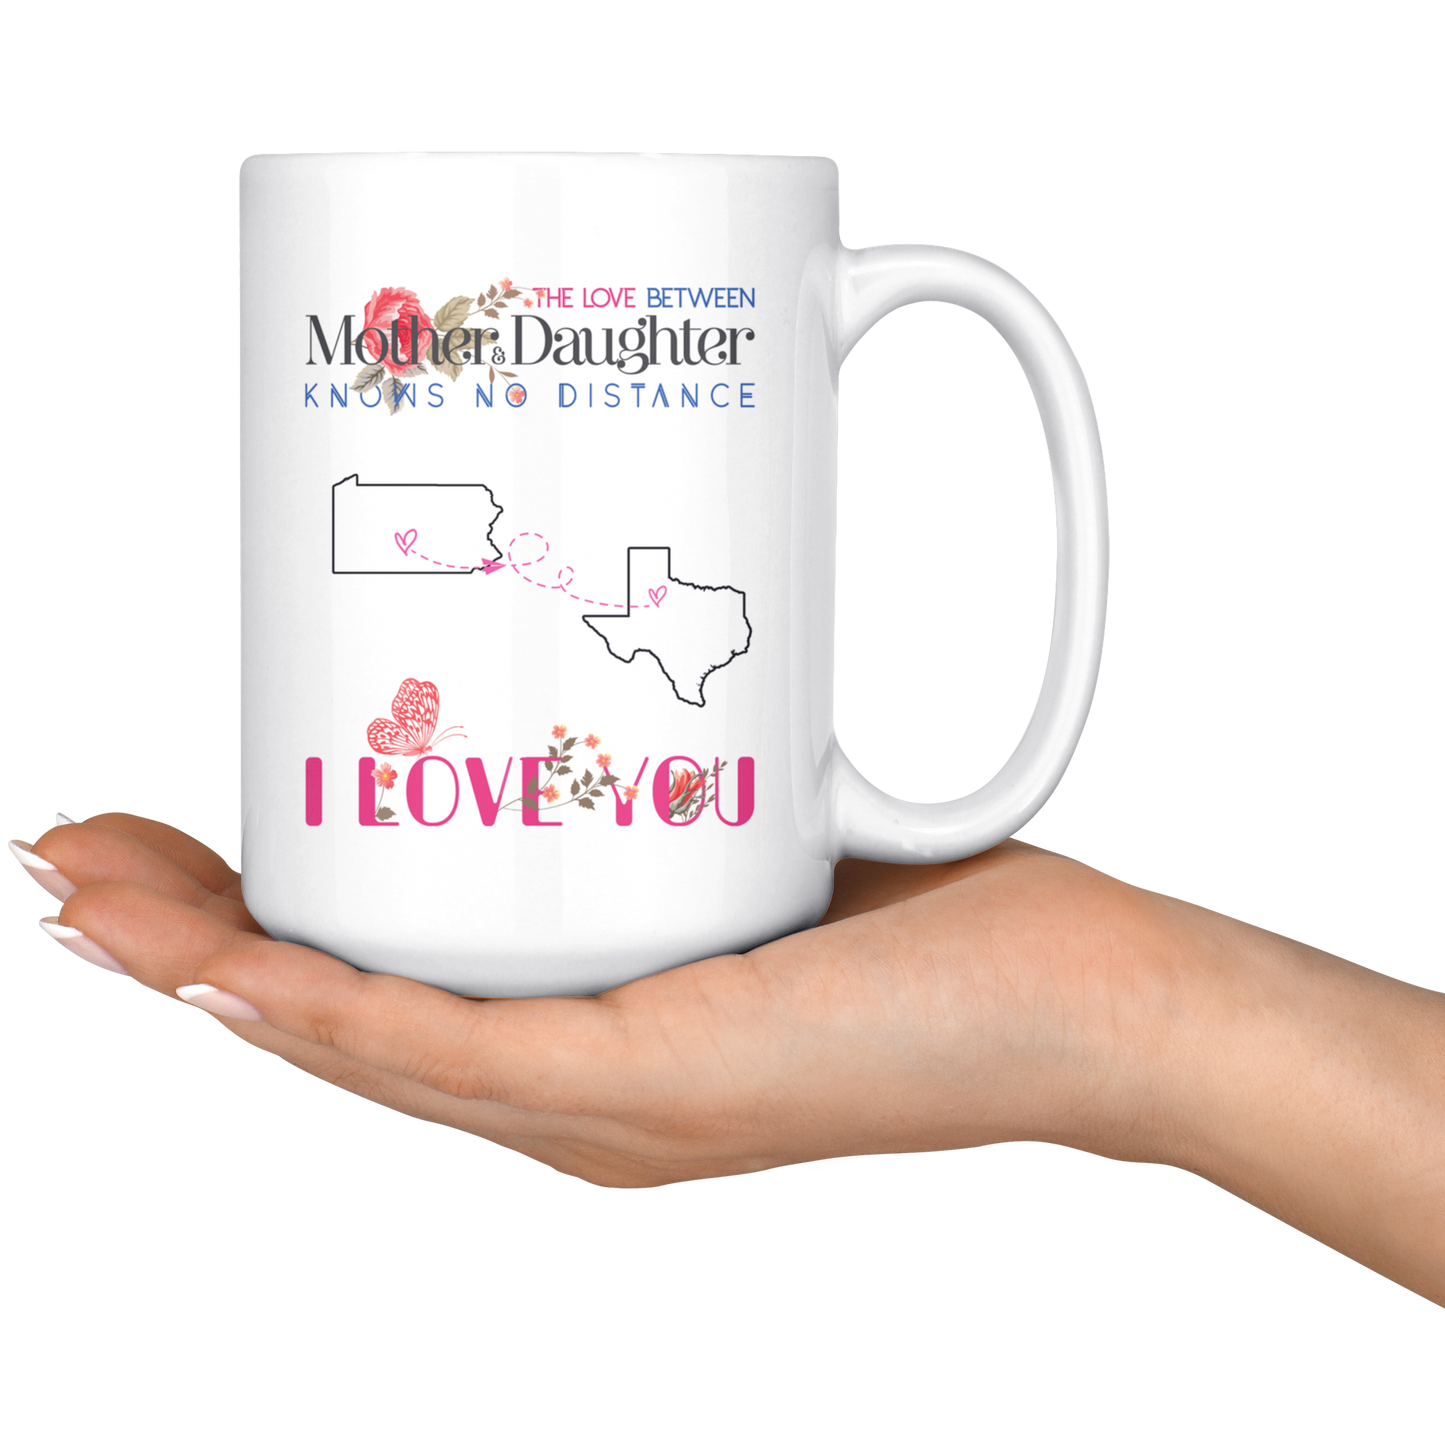 M-20377532-sp-23936 - [ Pennsylvania | Texas | 1 ]Mothers Day Gift For Daughters Pennsylvania Texas The Love B